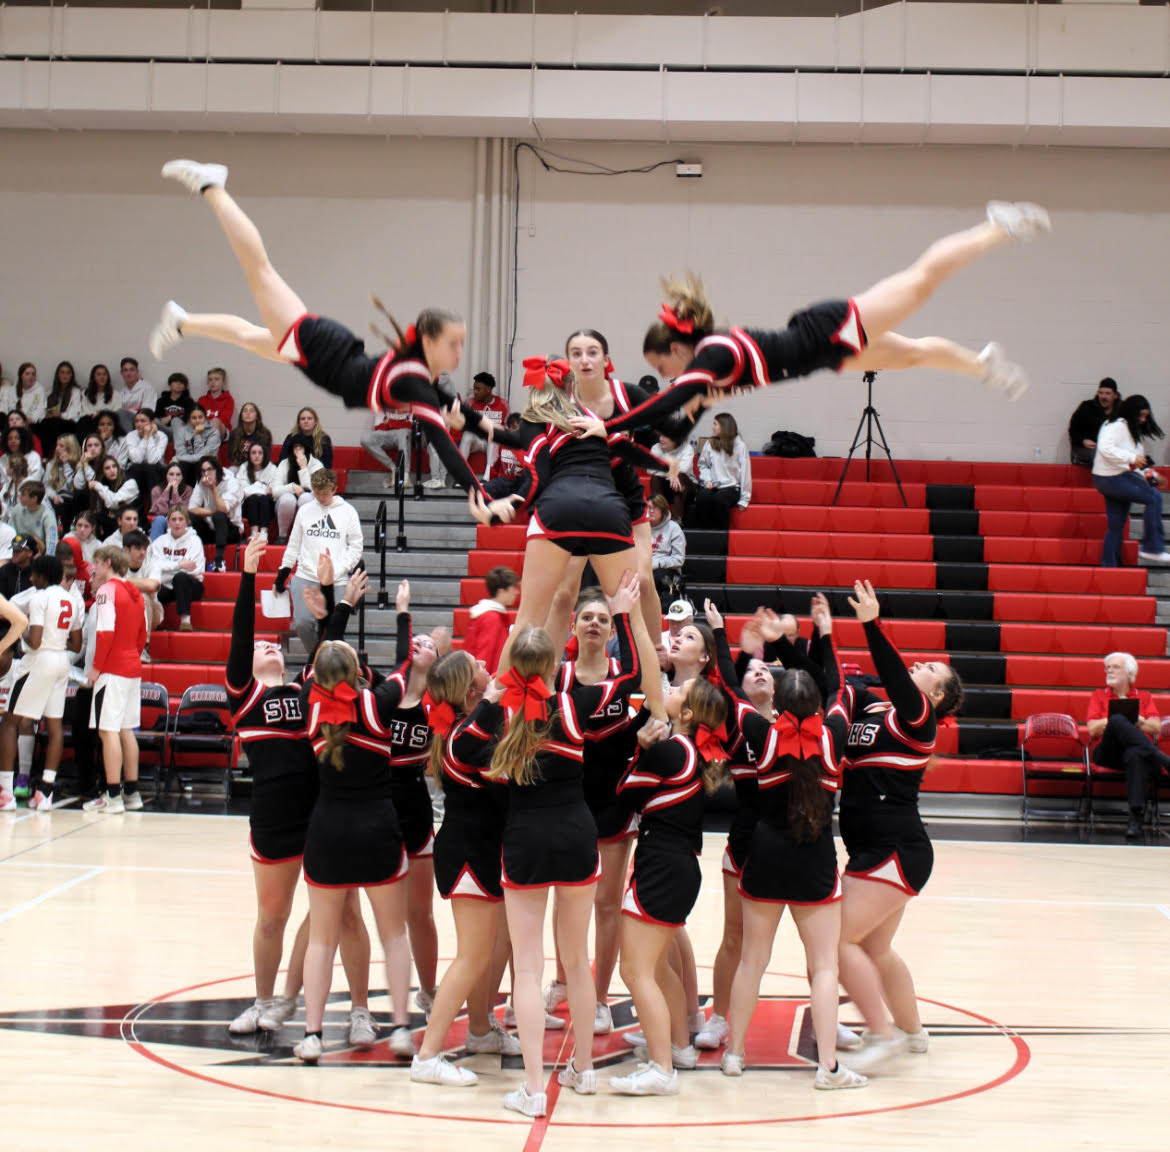 With blood rushing through their veins, making sure no one falls, the cheer team carefully and enthusiastically throws the cheerleaders into the air during their  routine at a boys basketball game.  Photograph Courtesy of Joce Sterman